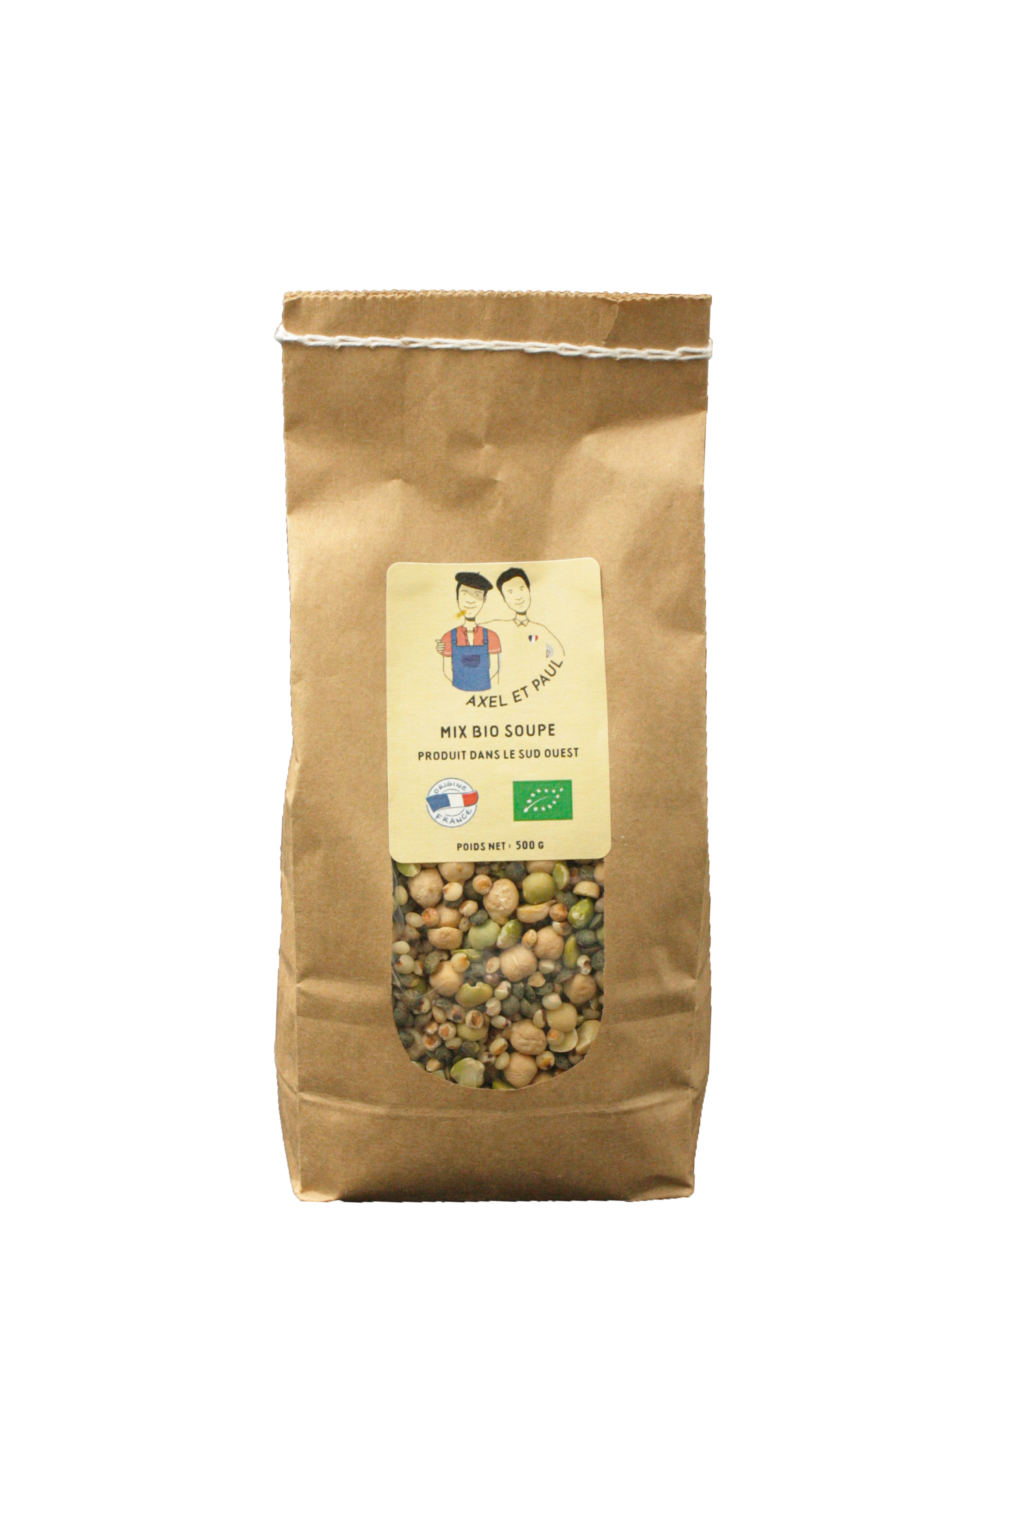 Axel et Paul Organic Mixed Beans and Pulses for Soup 500g